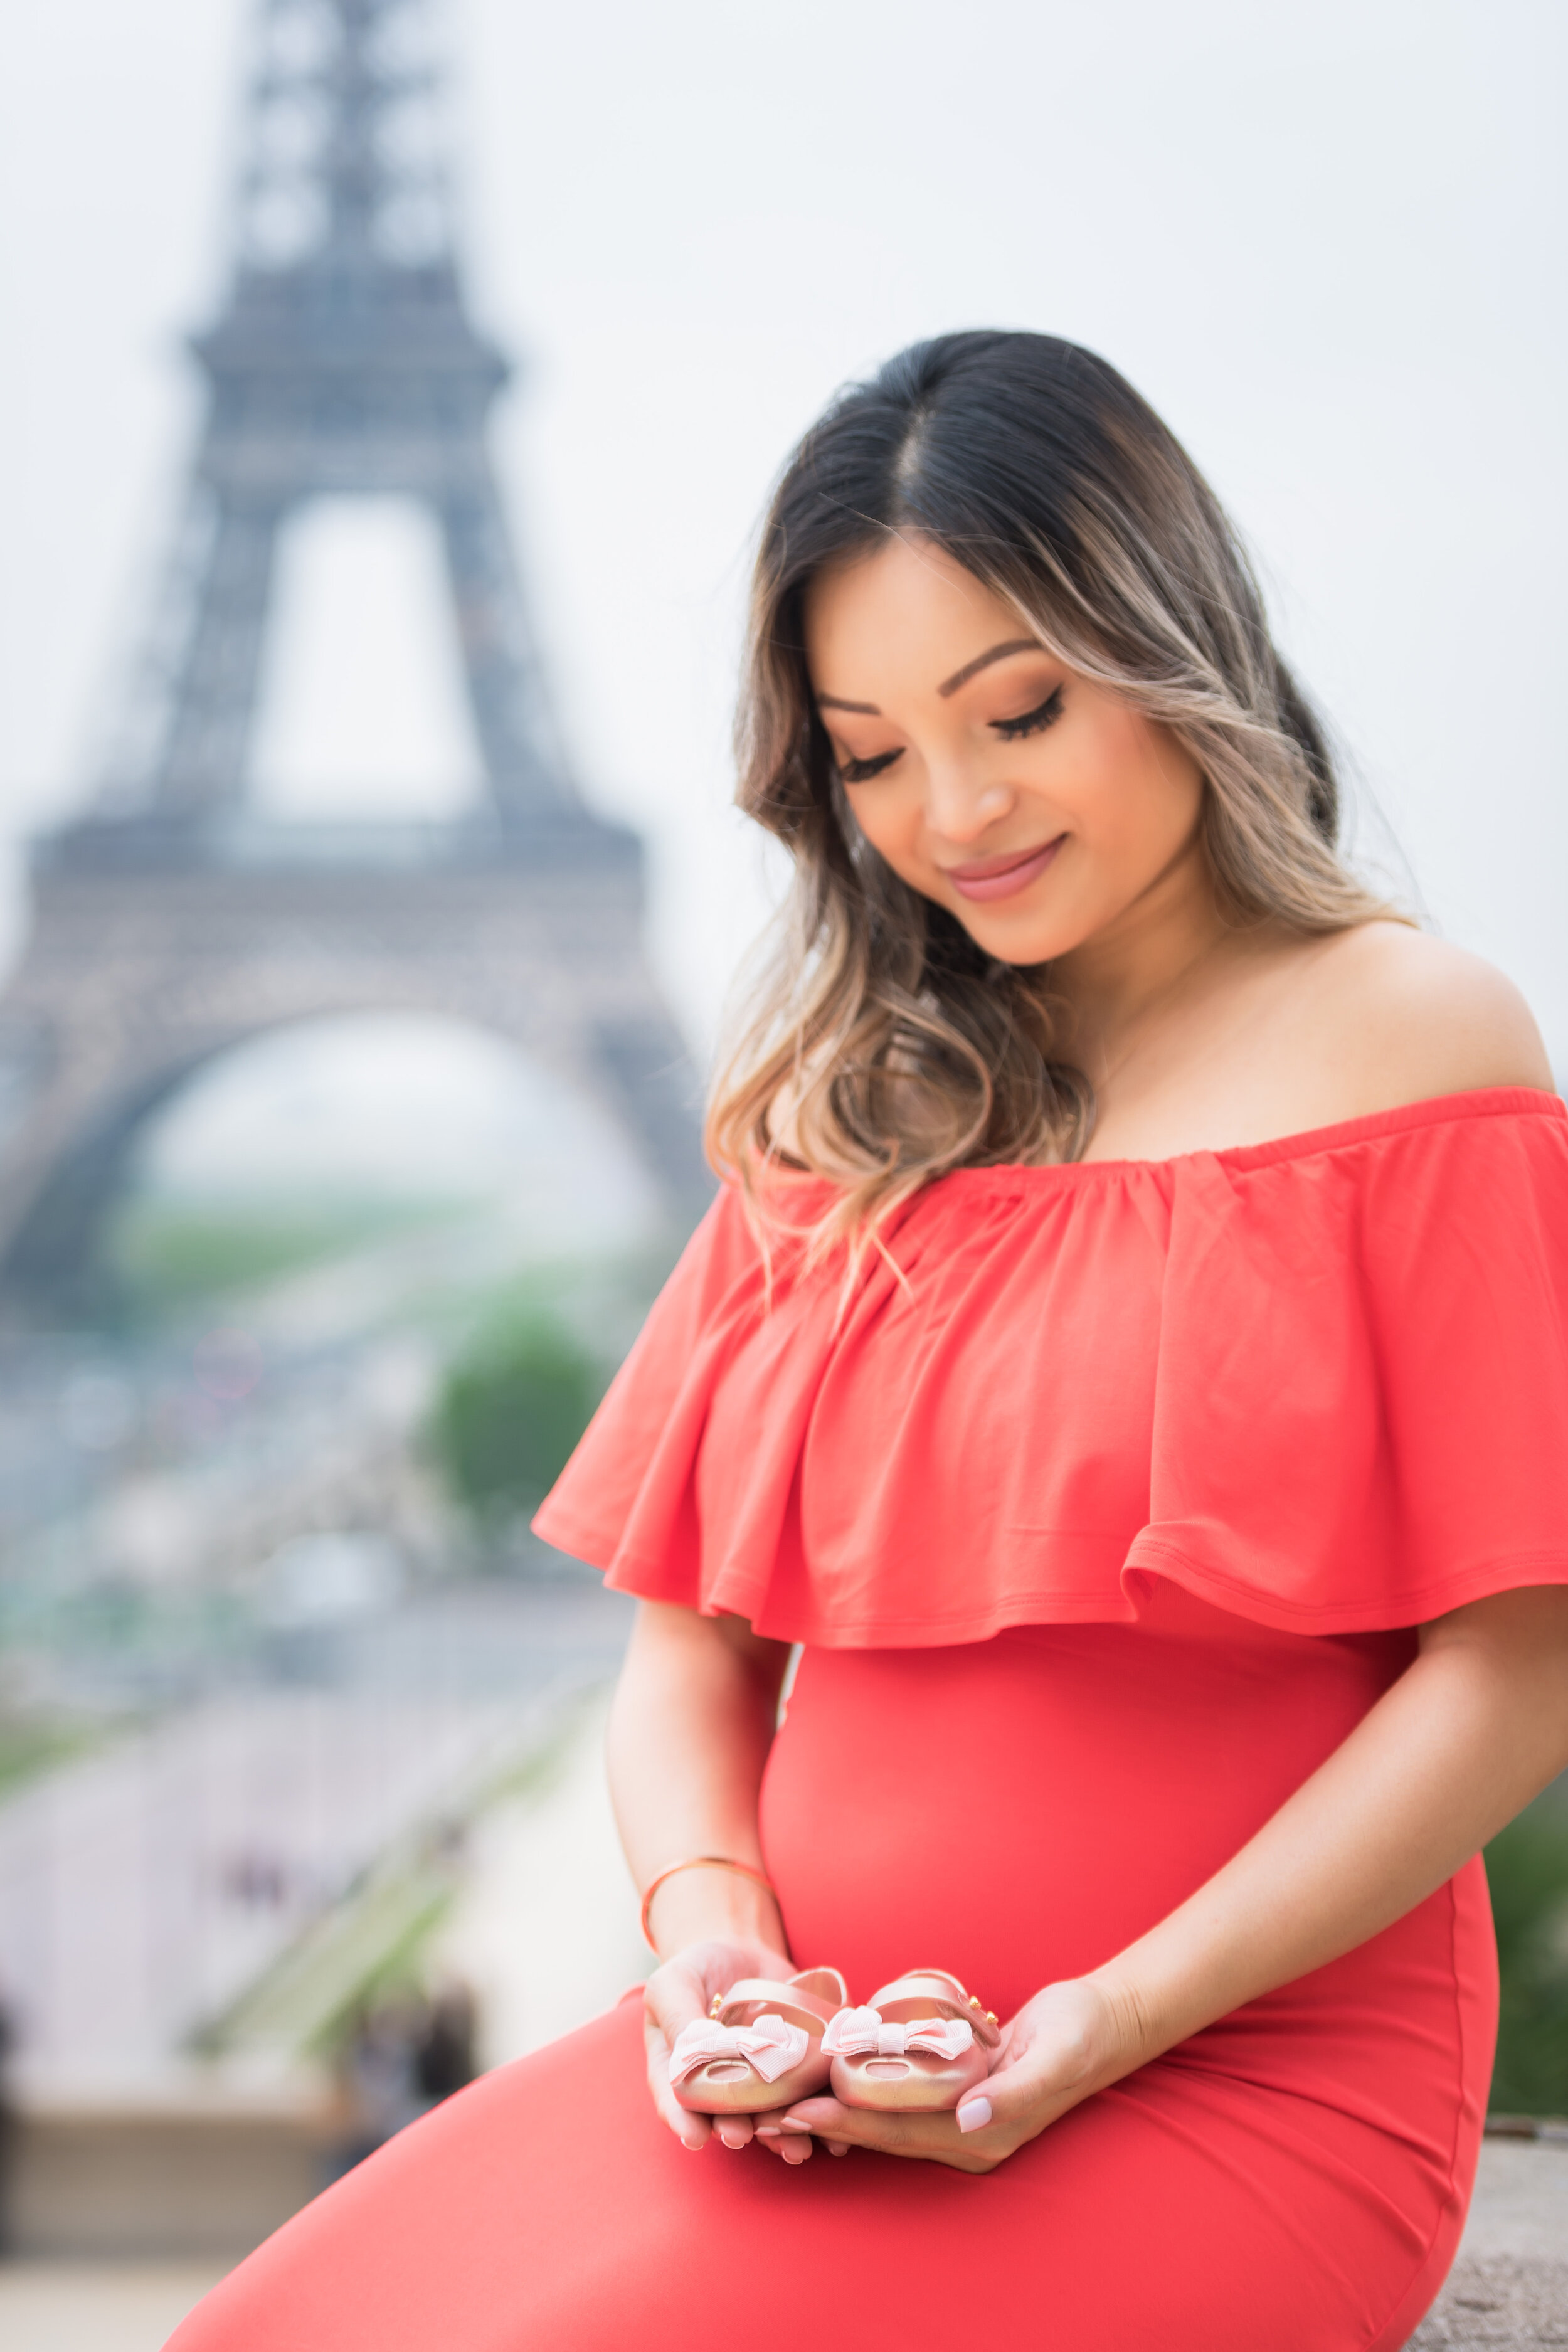 Maternity Photoshoot at the Eiffel Tower, Paris